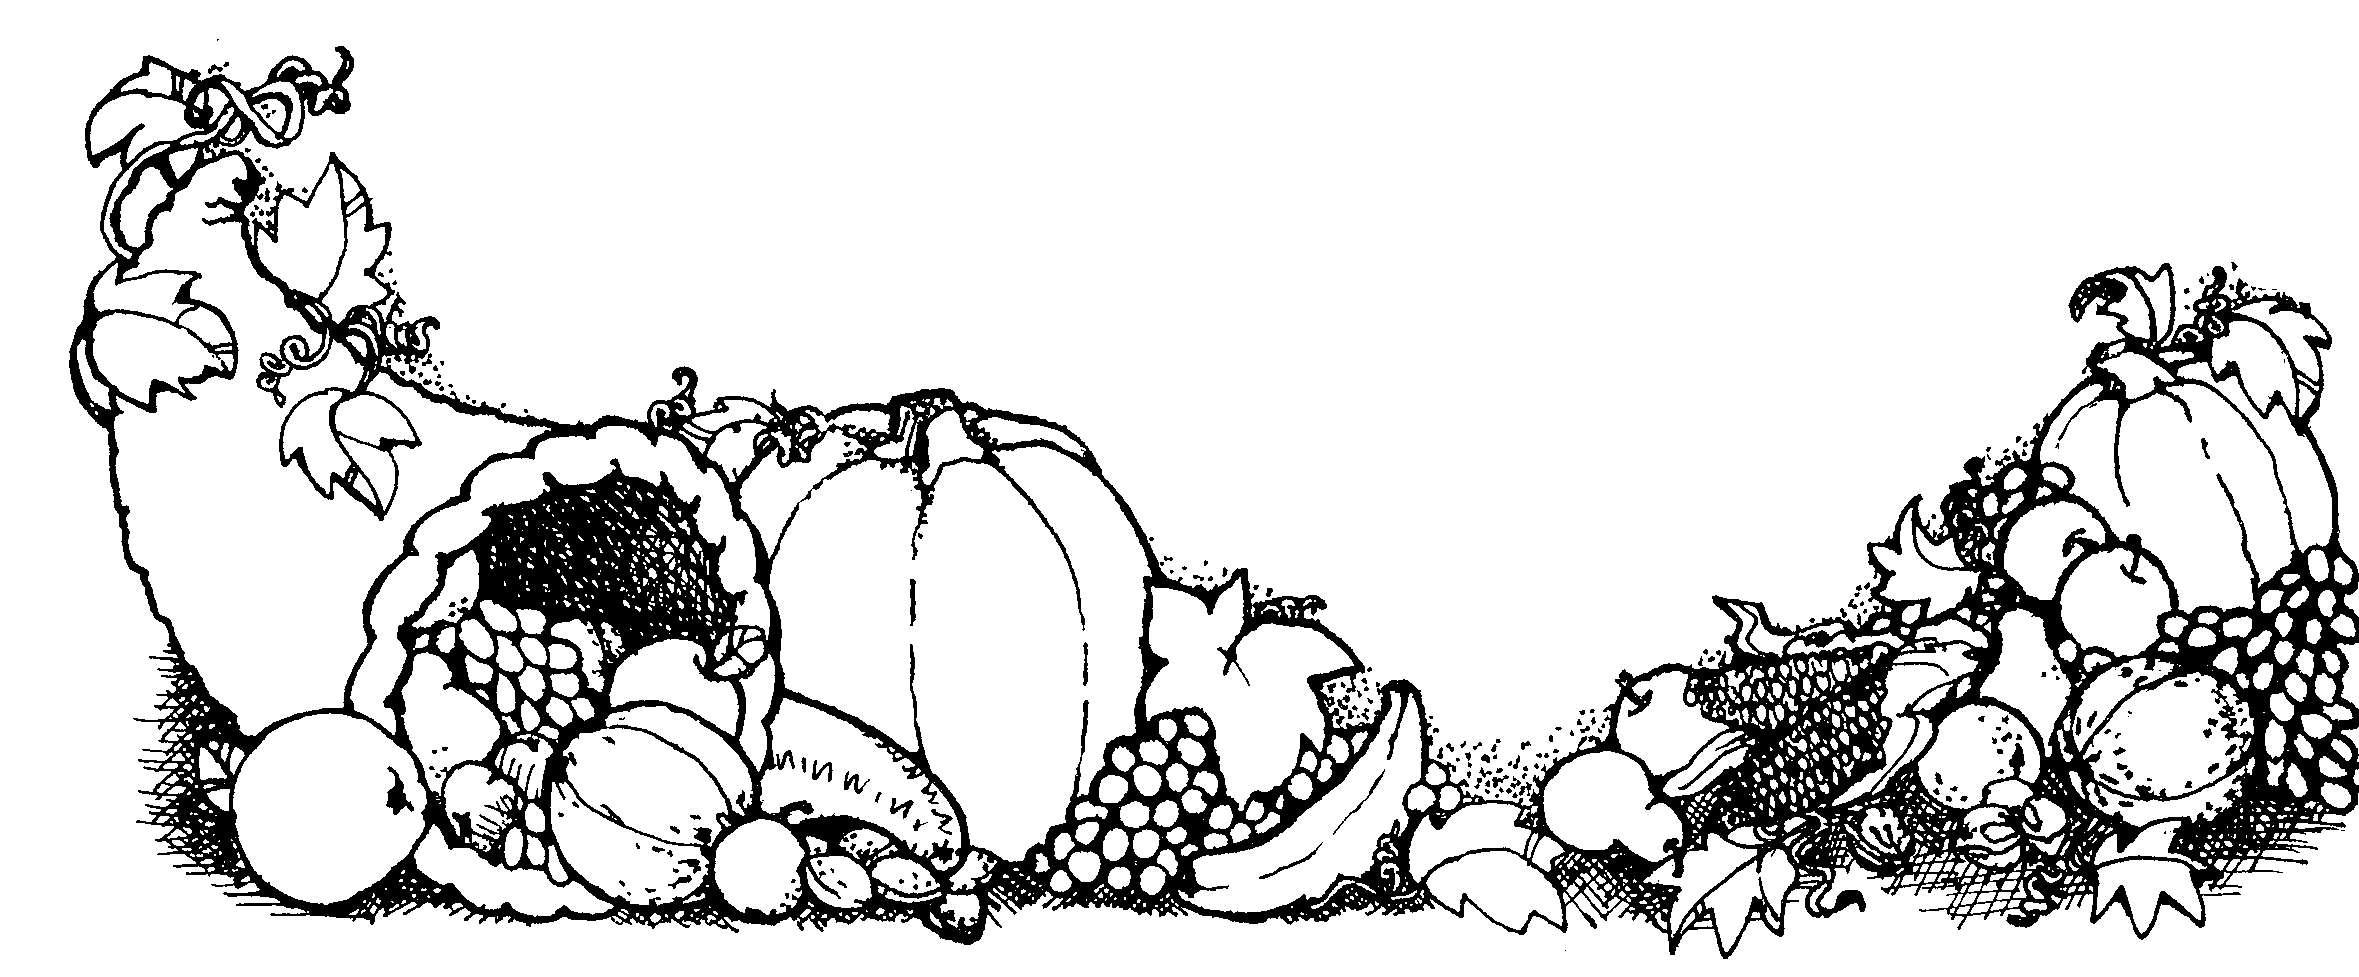 53 Free Turkey Clipart Black And White - Cliparting.com